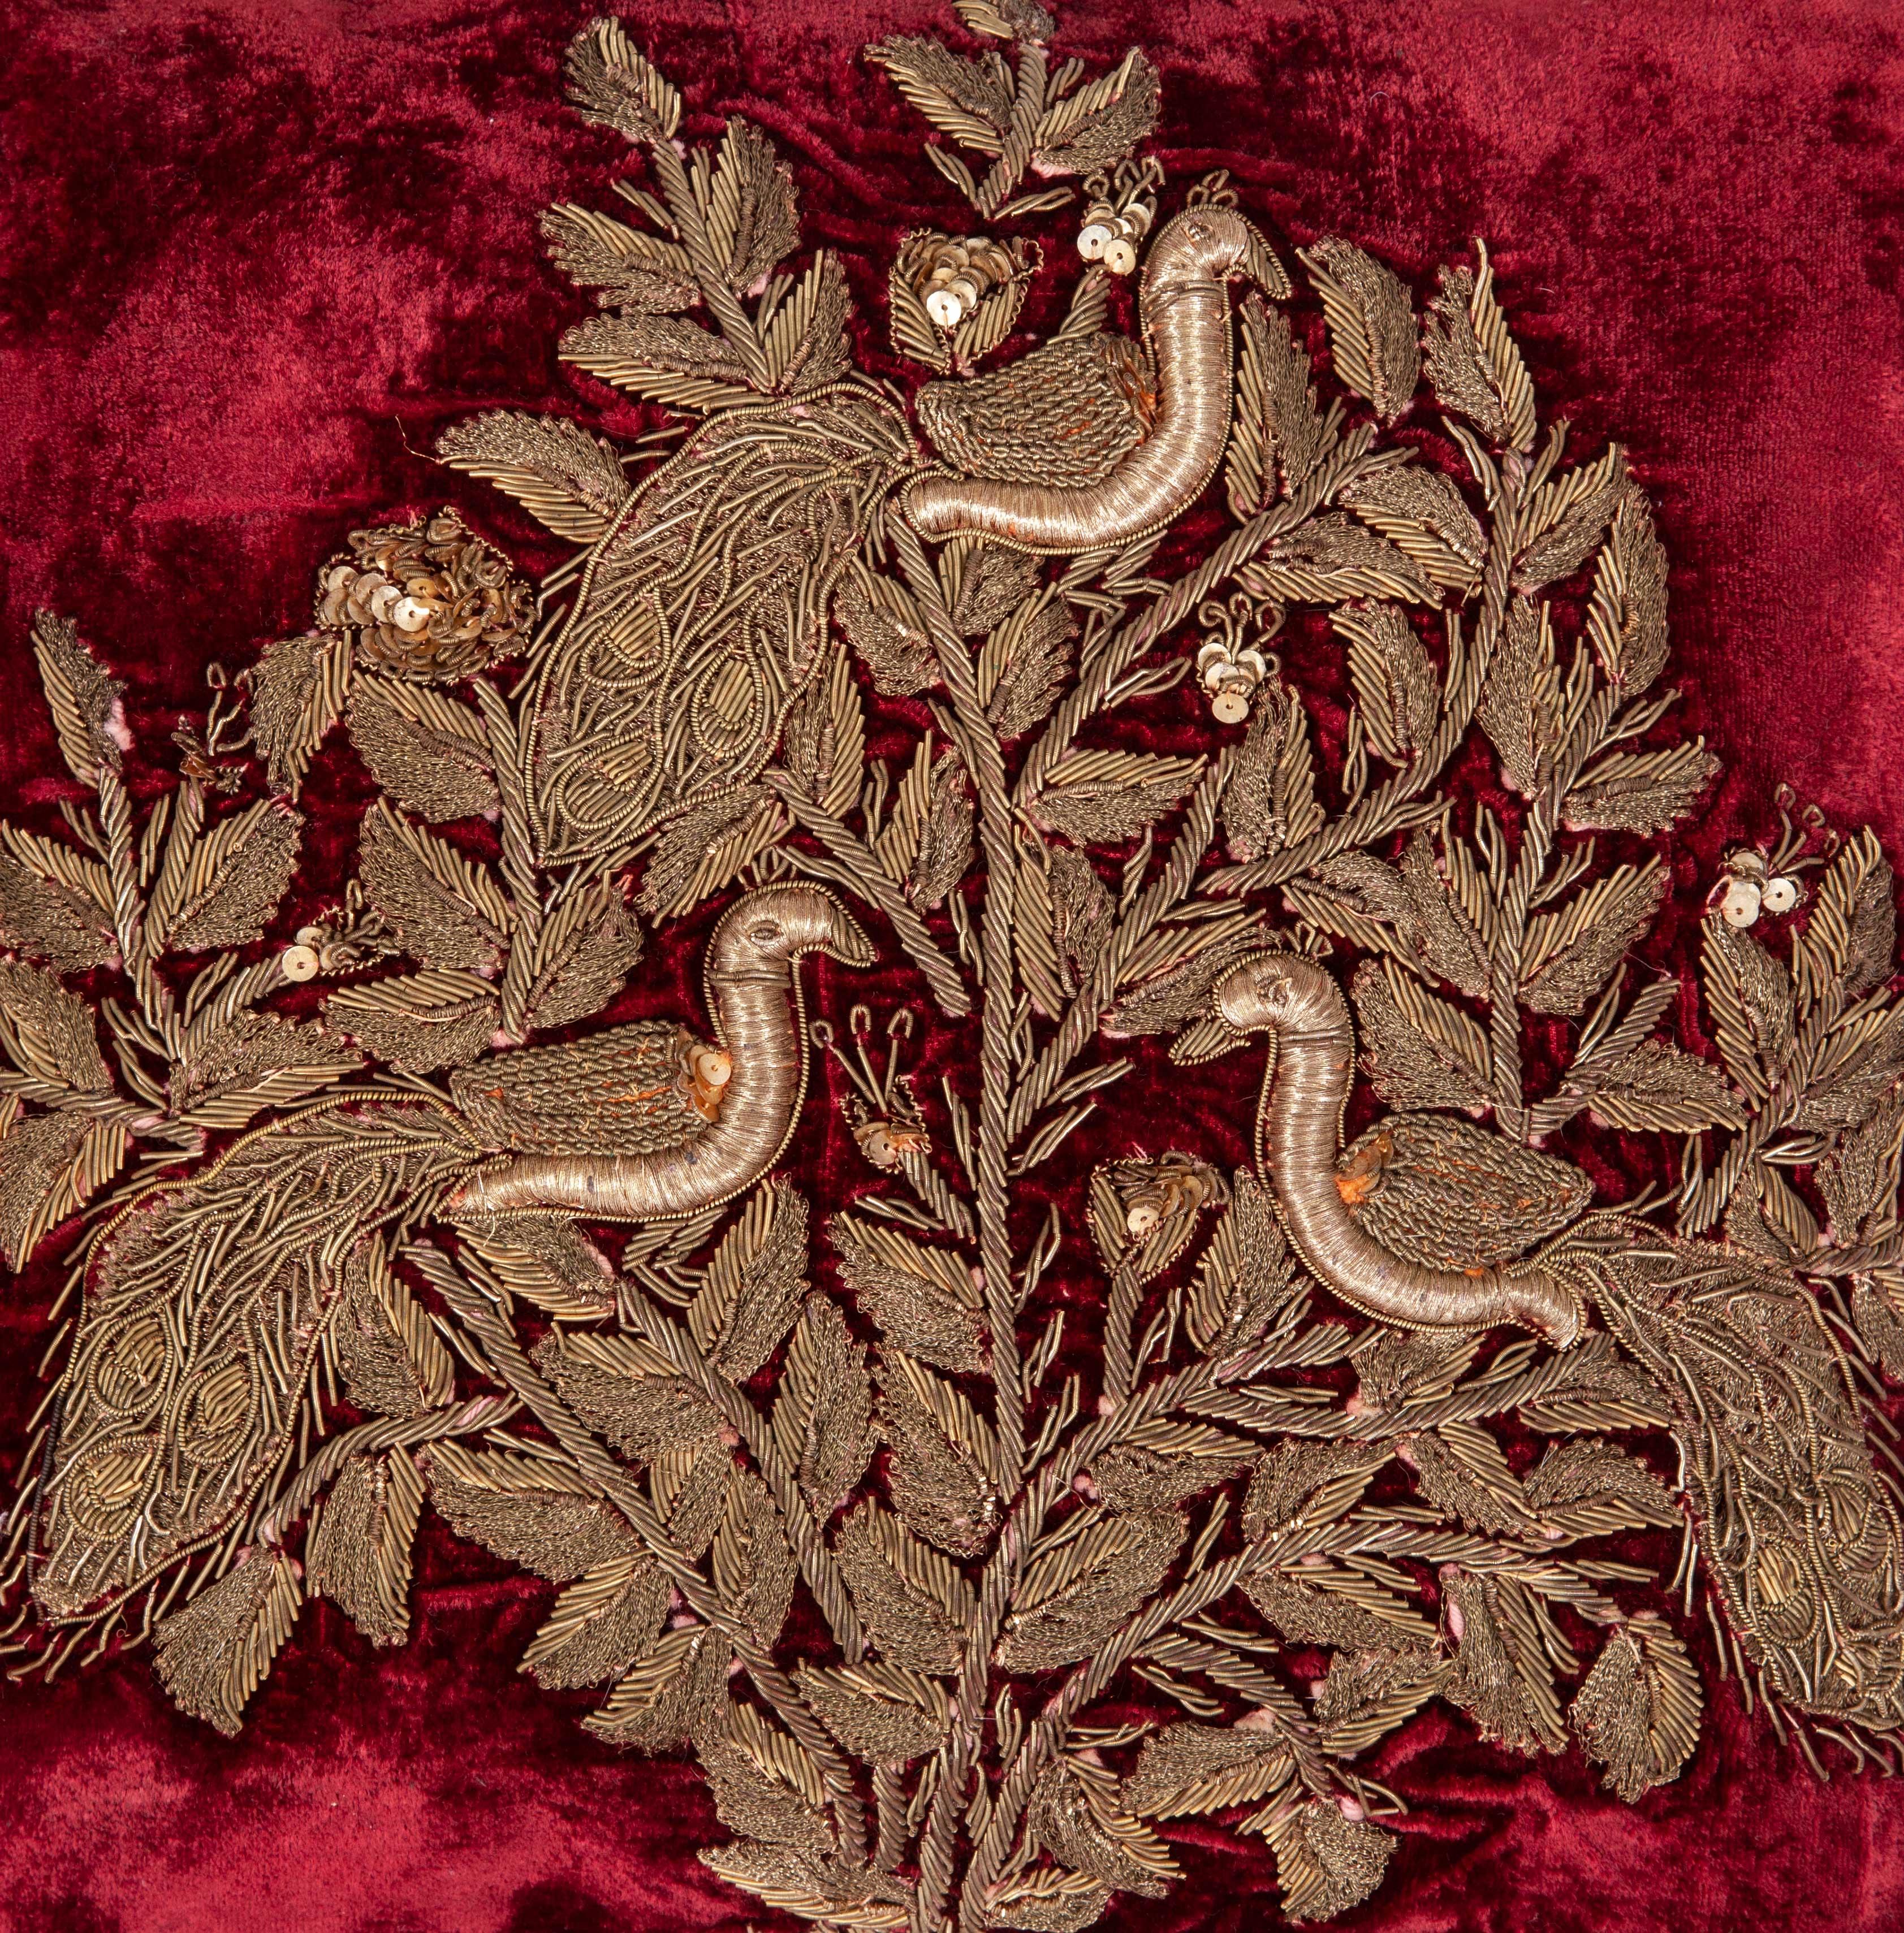 Indian Silk Velvet Pillow Cases with Metallic Embroidery from India, Early 20th Century